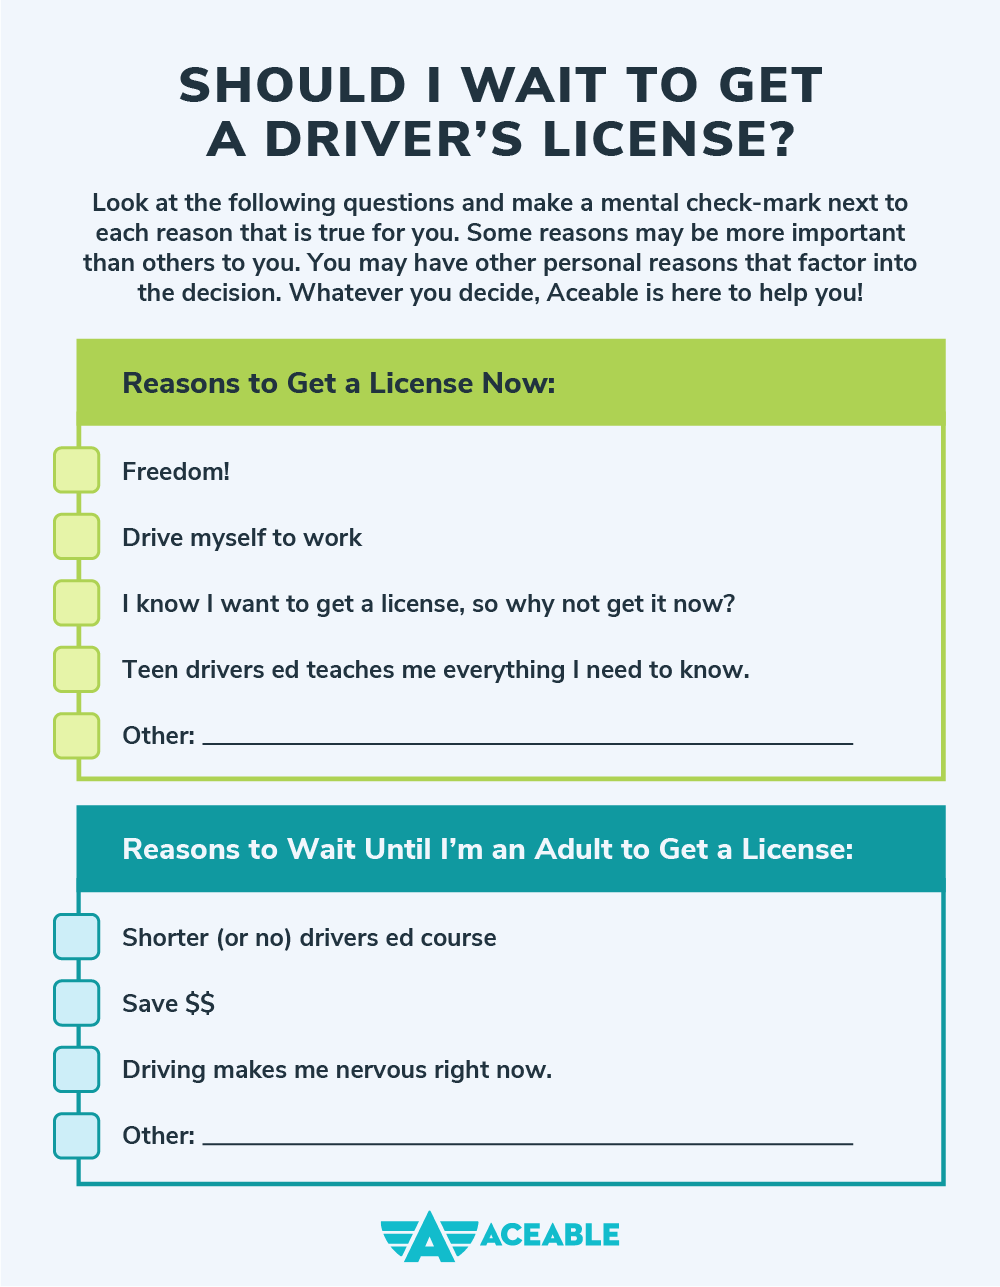 how long does it take to get driver's license